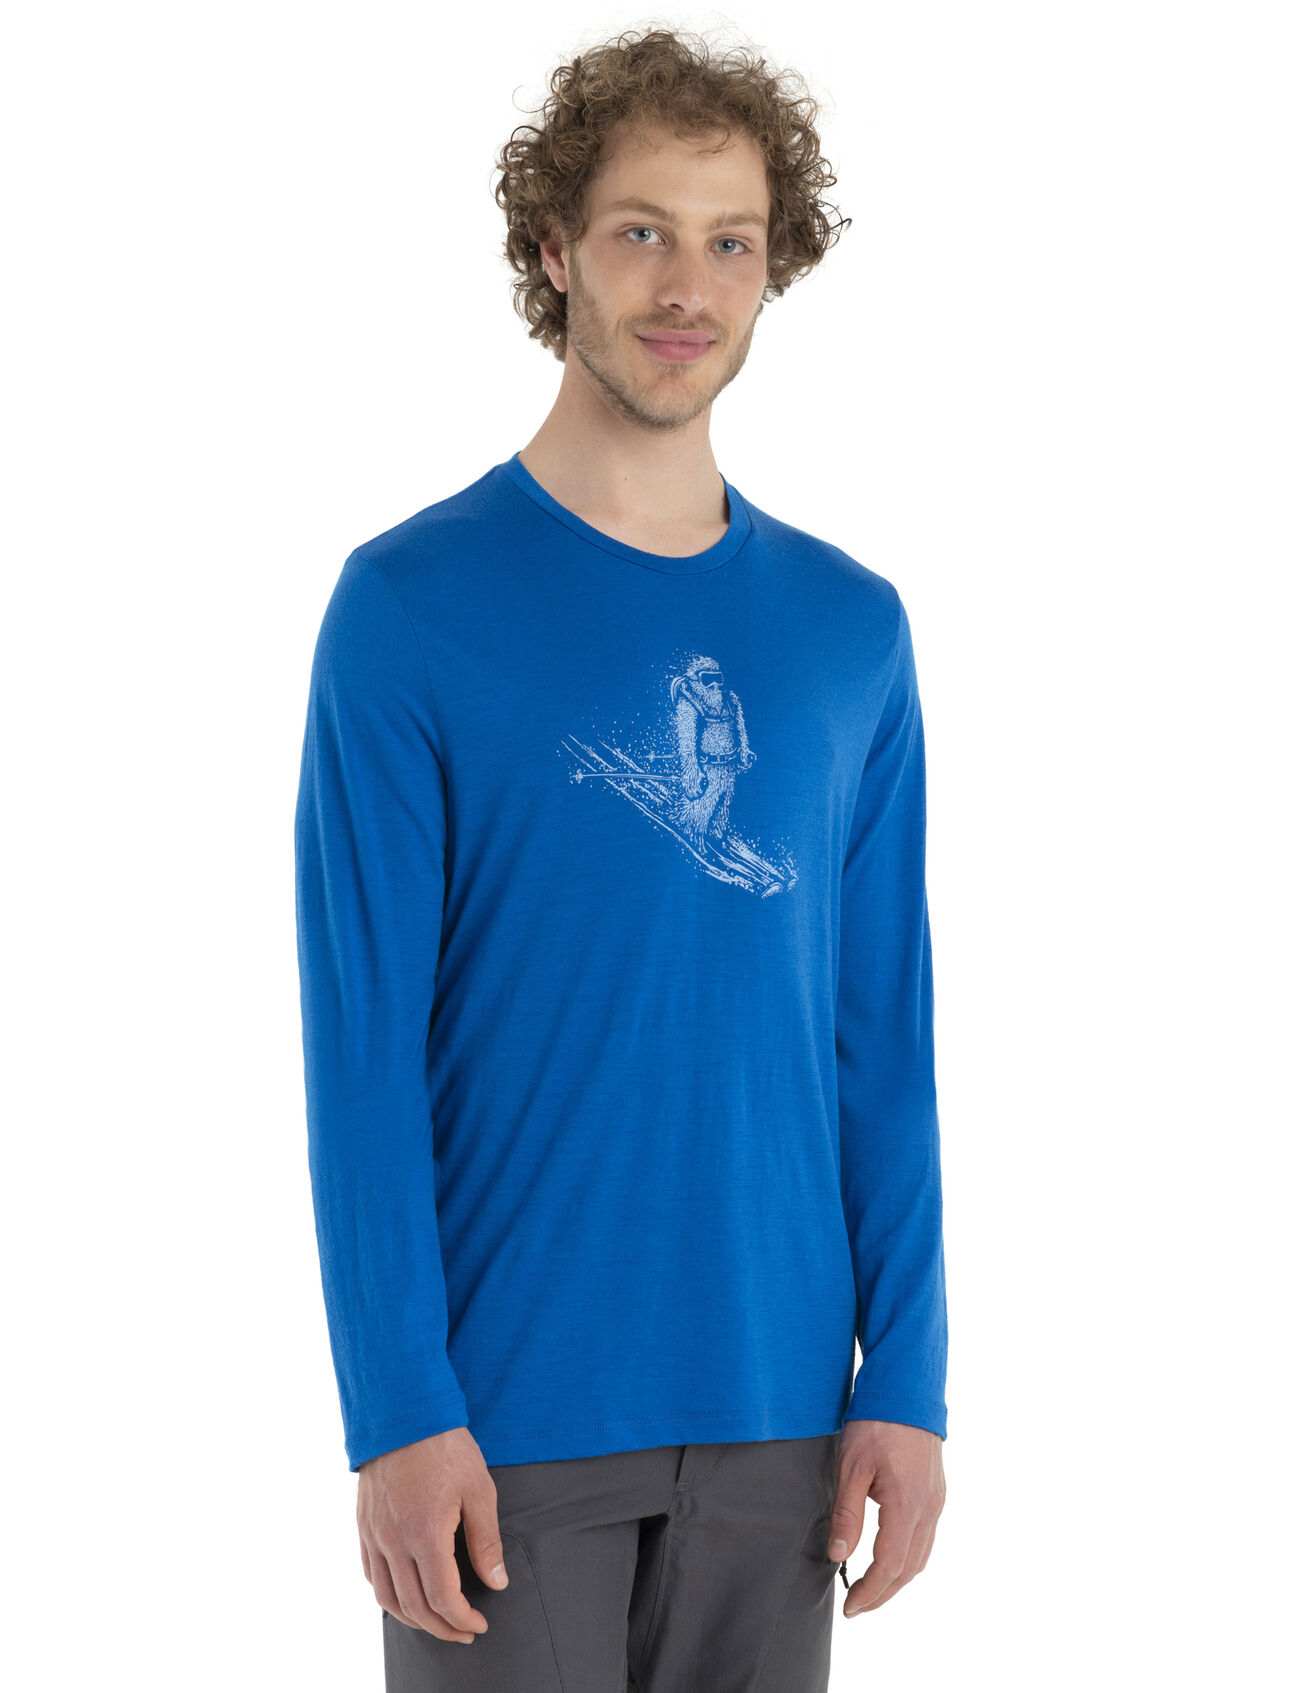 Mens Merino Tech Lite II Long Sleeve T-Shirt Skiing Yeti Our versatile tech tee that provides comfort, breathability and natural odor-resistance for any adventure you can think of, the Tech Lite II Long Sleeve Tee Skiing Yeti features 100% merino for all-natural performance. The original artwork by Damon Watters features a fun illustration of the ultimate mountain dweller enjoying some turns.